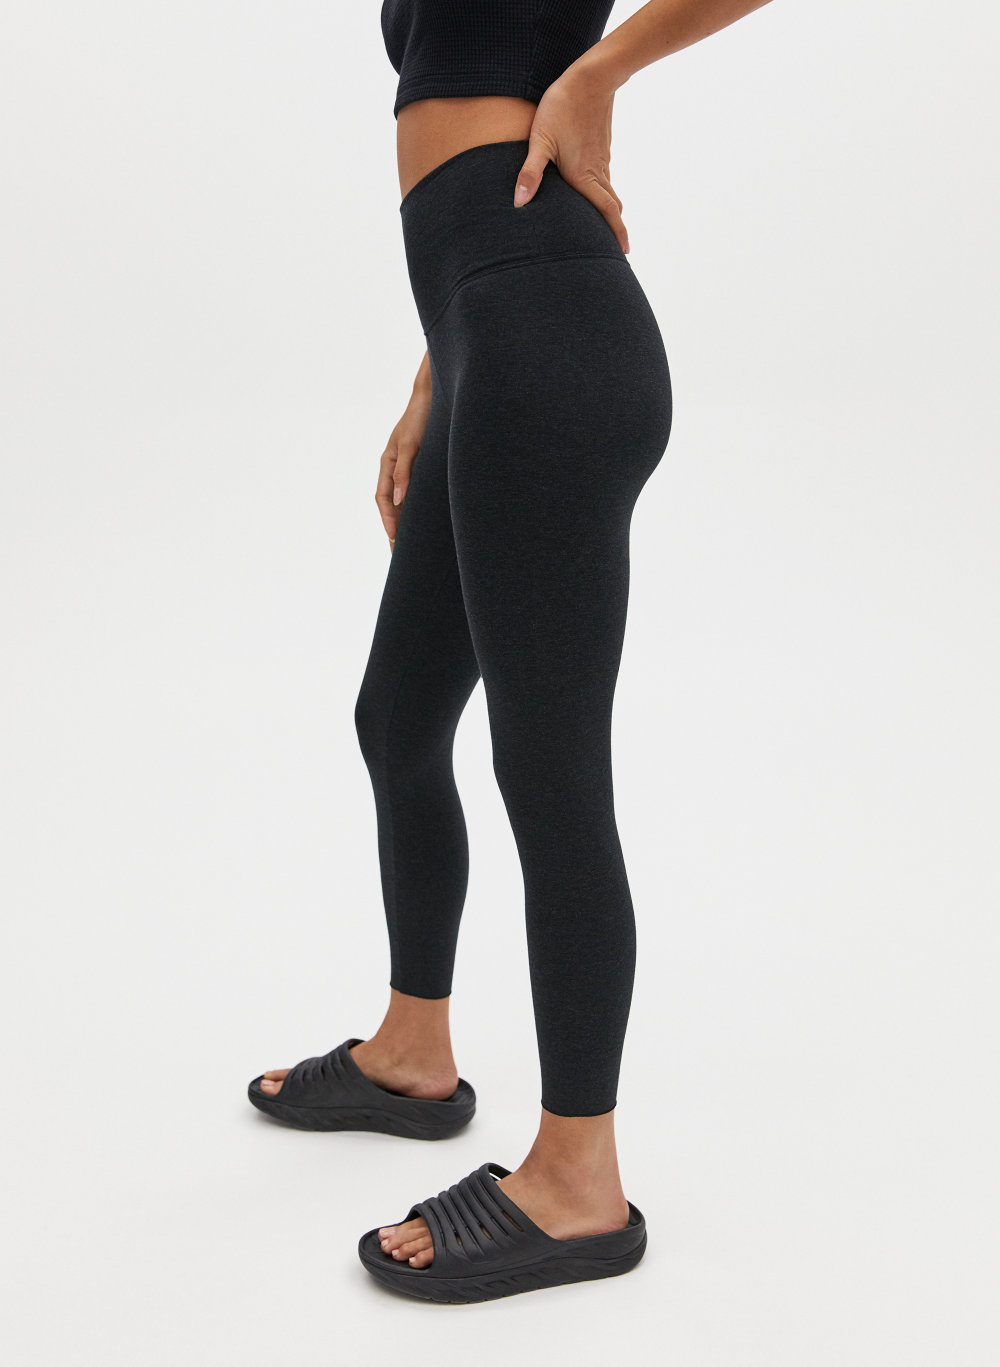 Aritzia Tna Butter Leggings Review  International Society of Precision  Agriculture